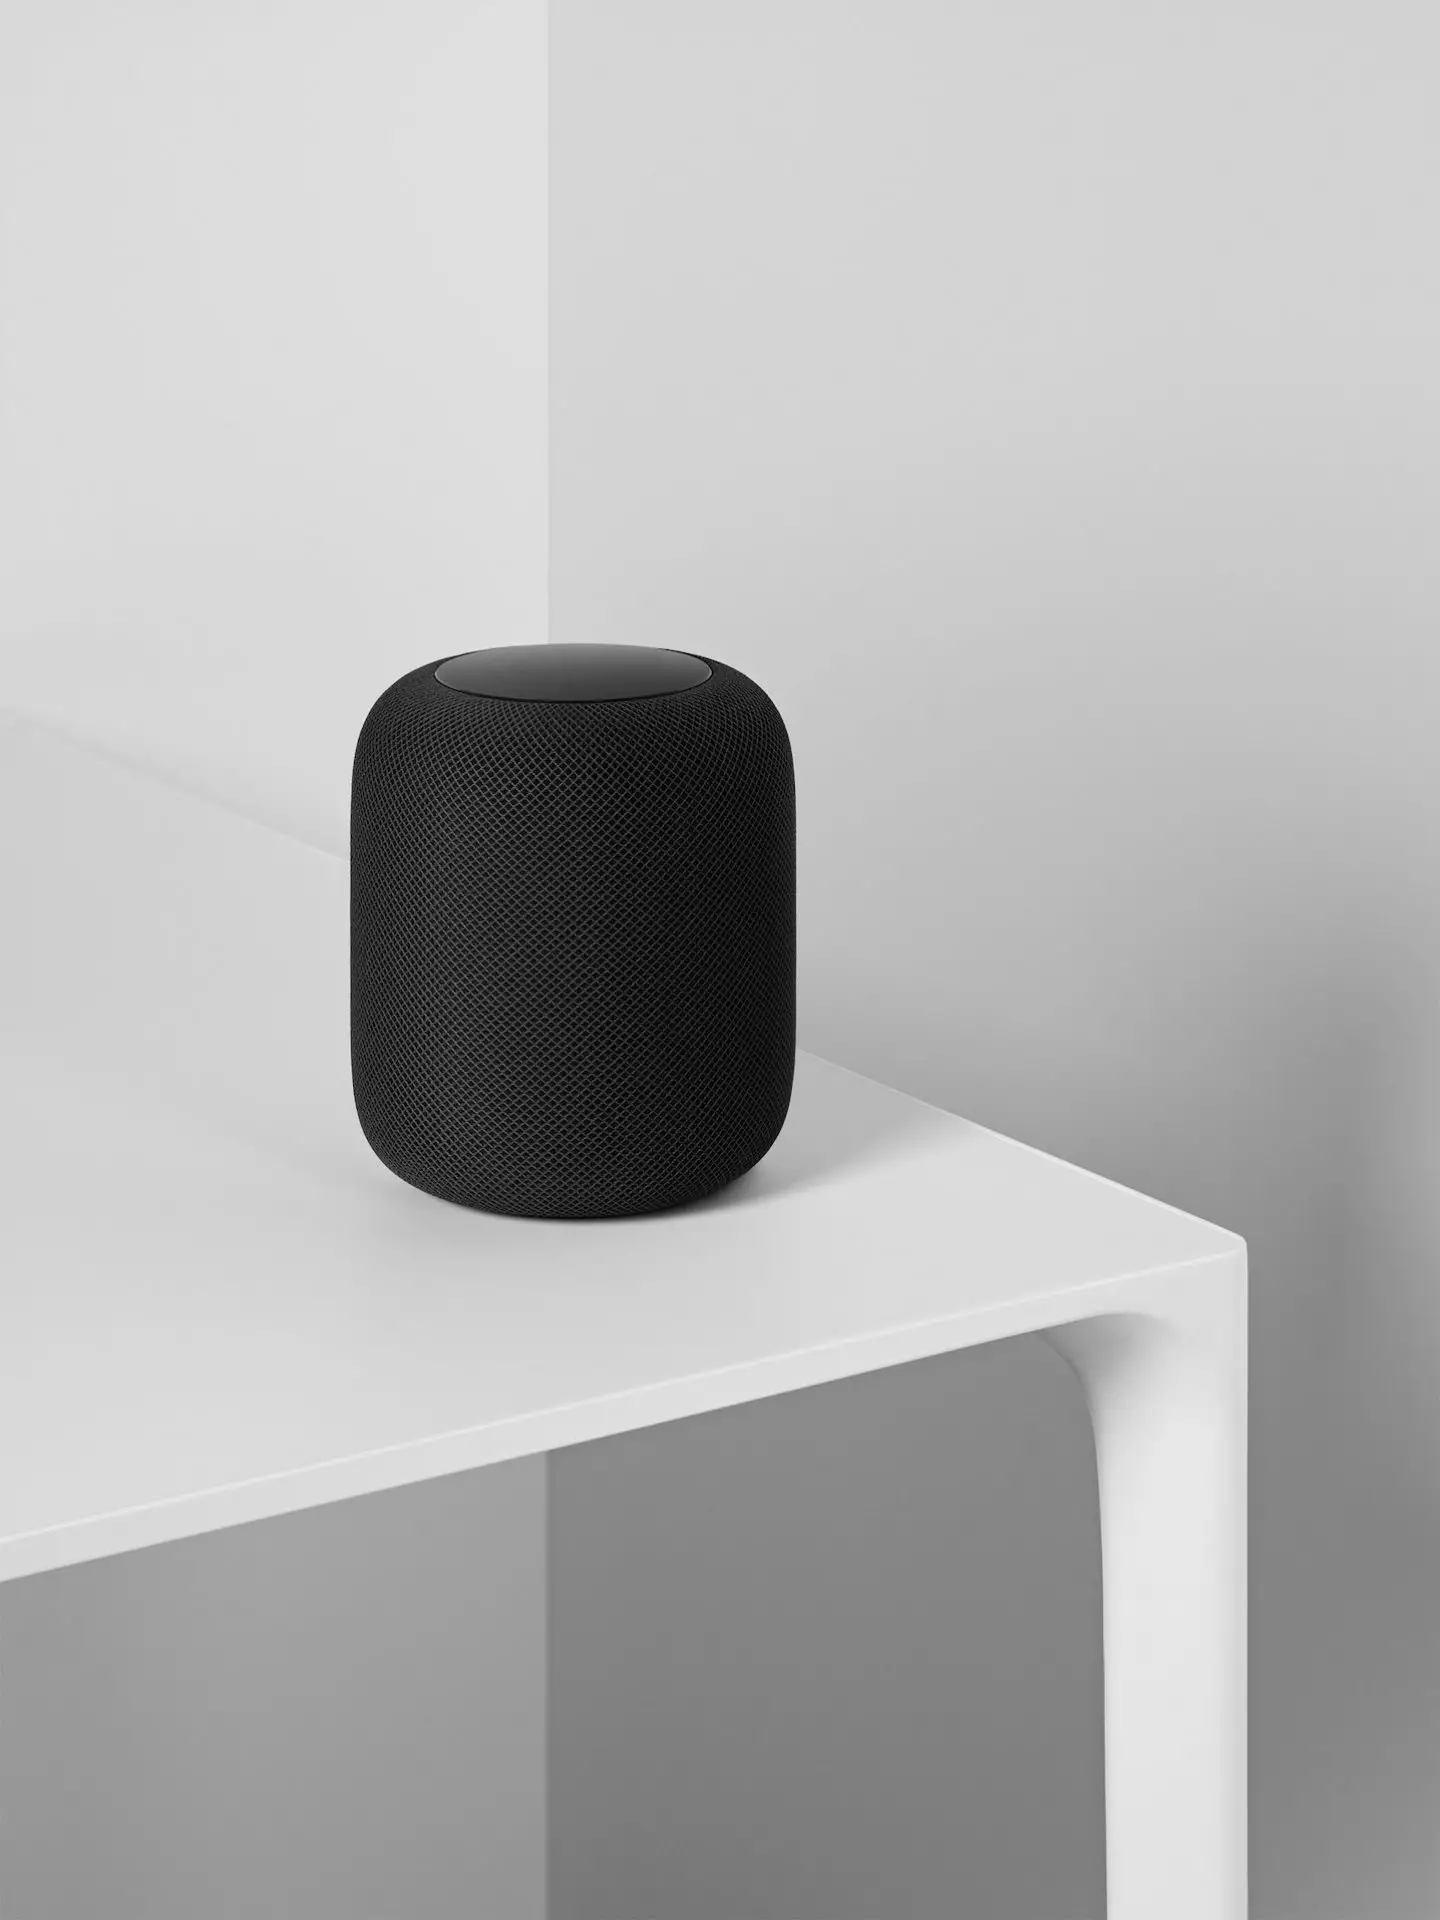 How to Add Calendar Events with HomePod 